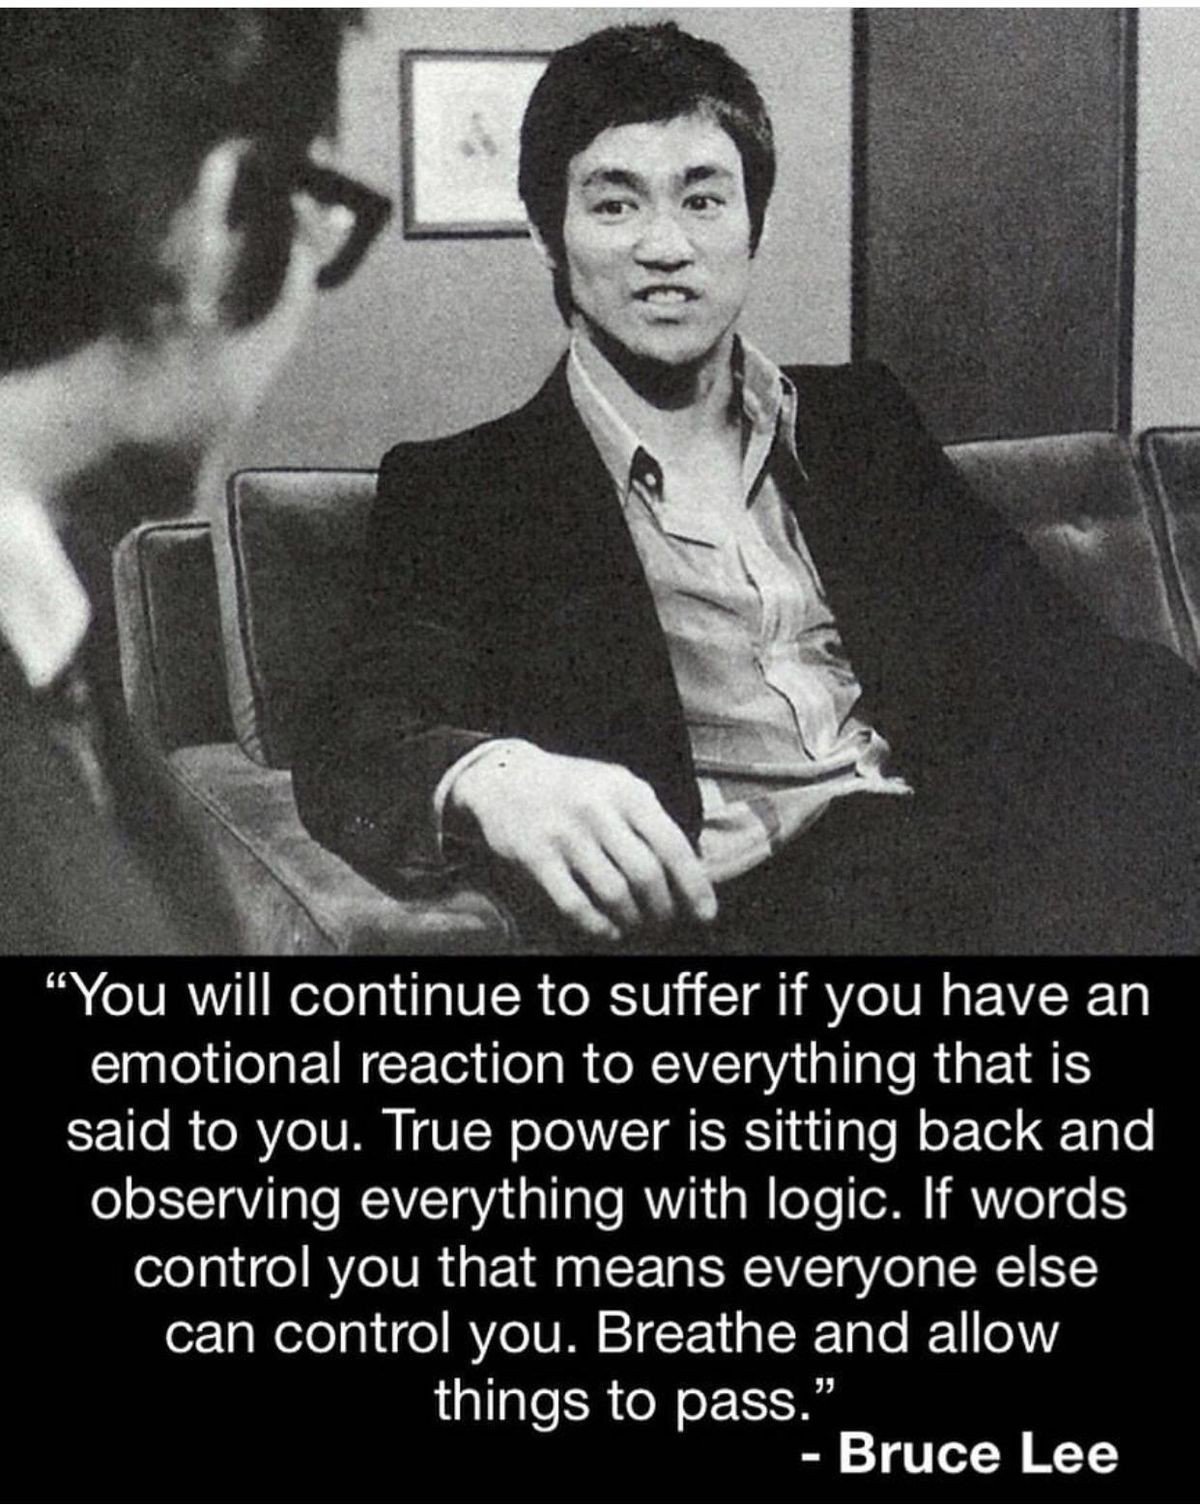 bruce lee wisdom - "You will continue to suffer if you have an emotional reaction to everything that is said to you. True power is sitting back and observing everything with logic. If words control you that means everyone else can control you. Breathe and